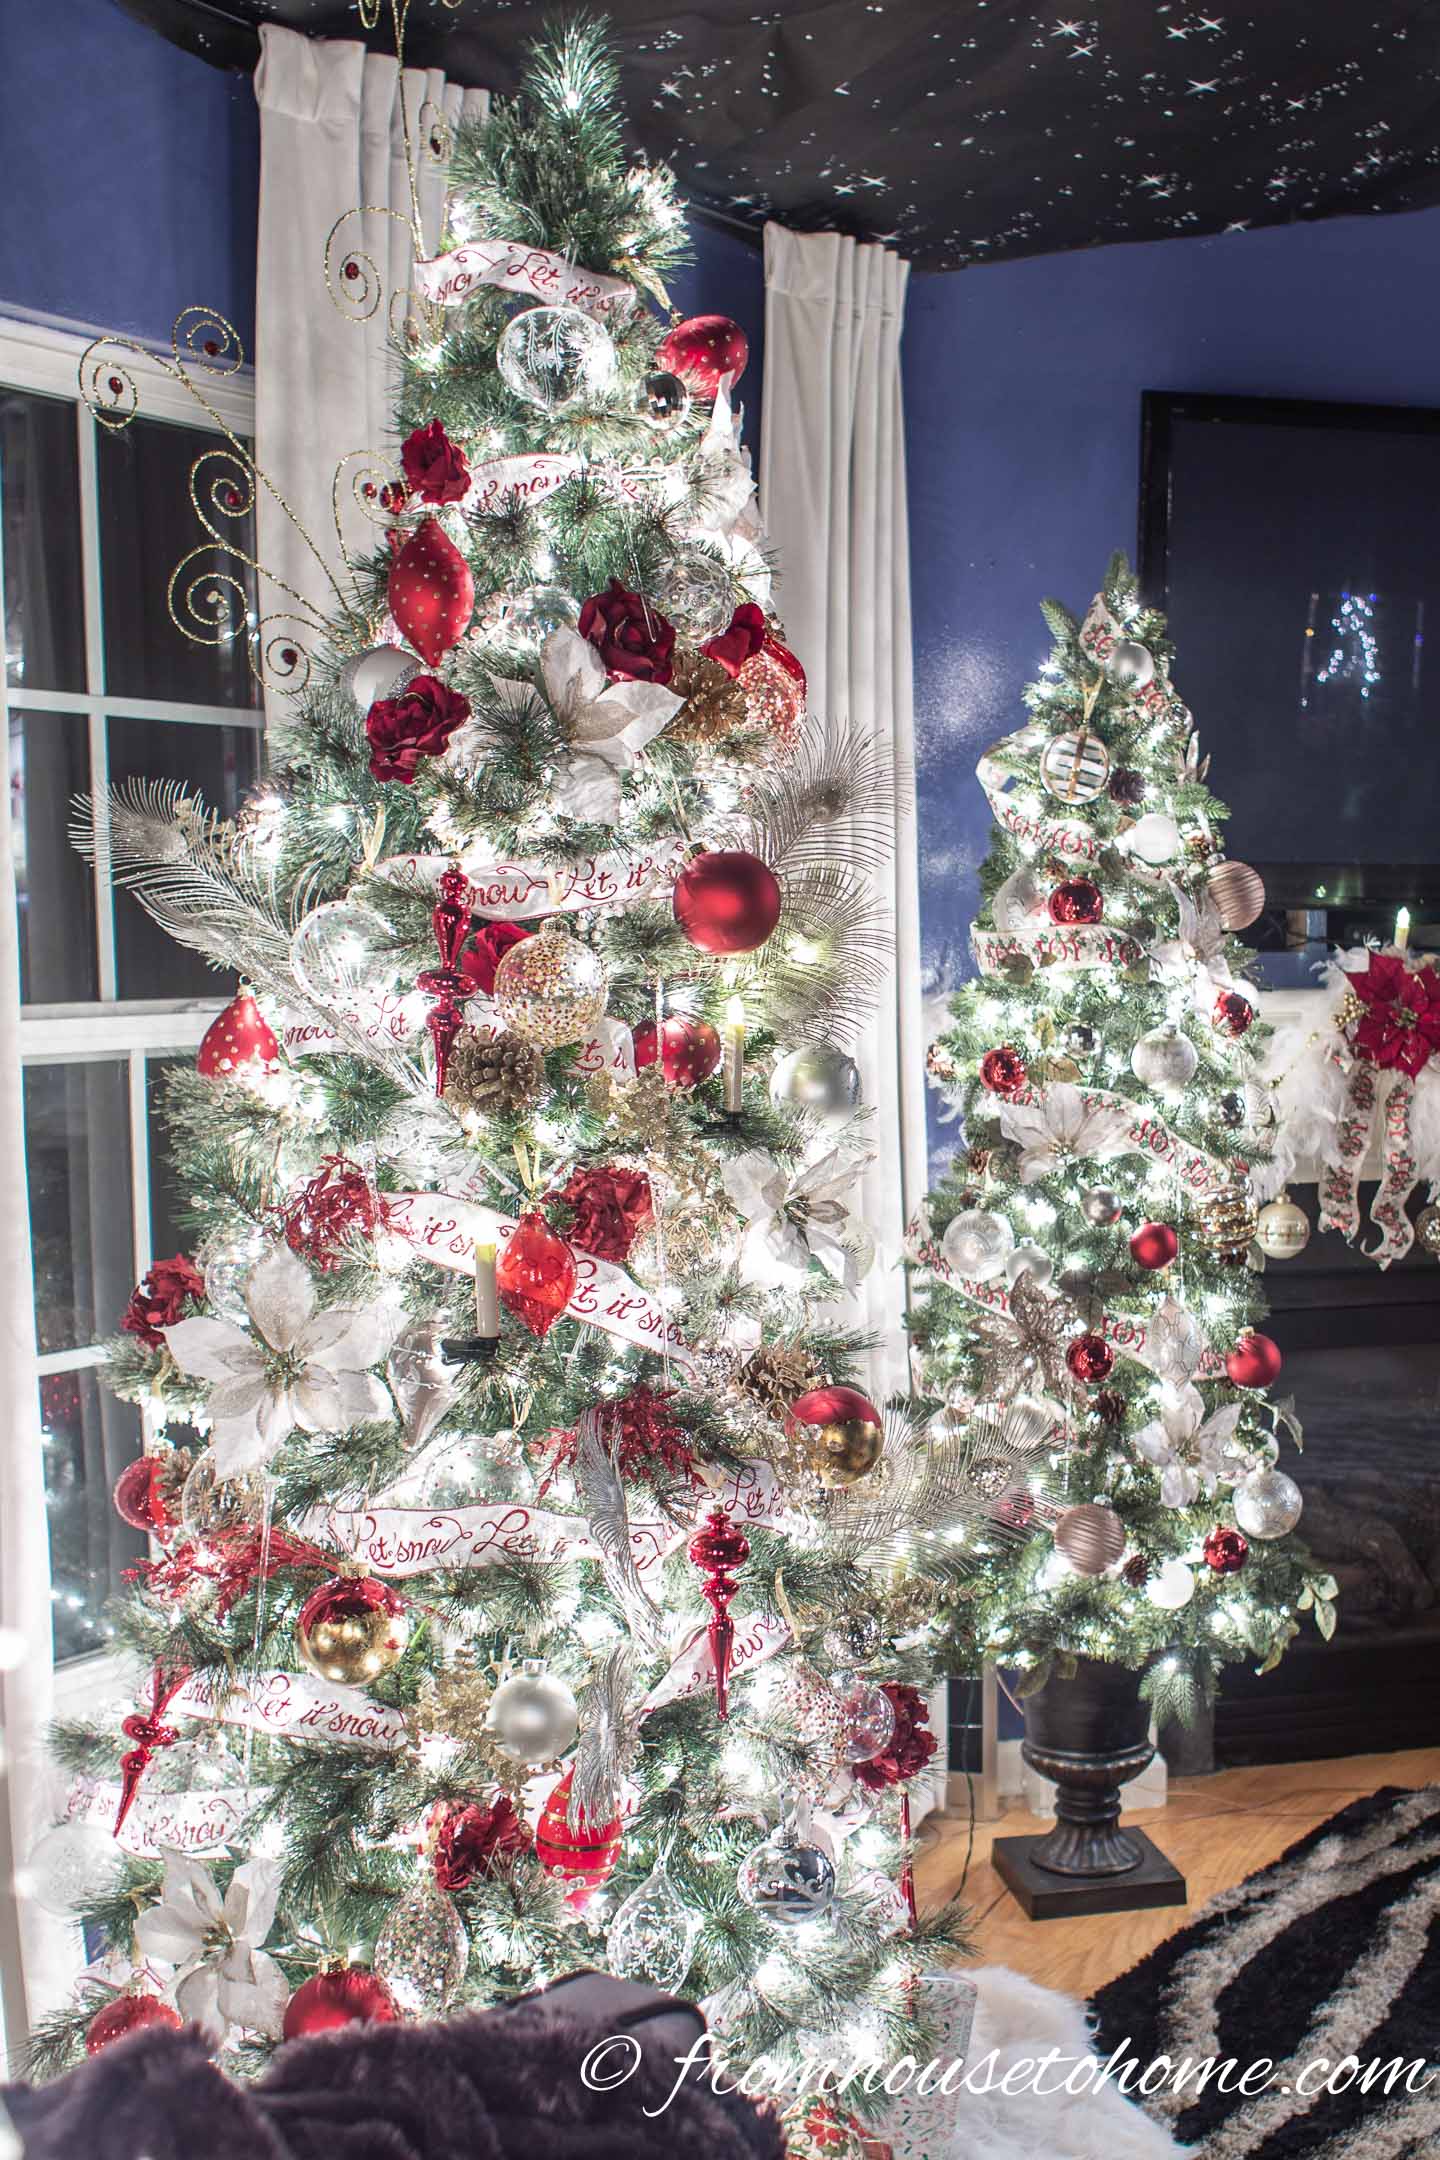 Two Christmas trees decorated with red, white and gold ornaments